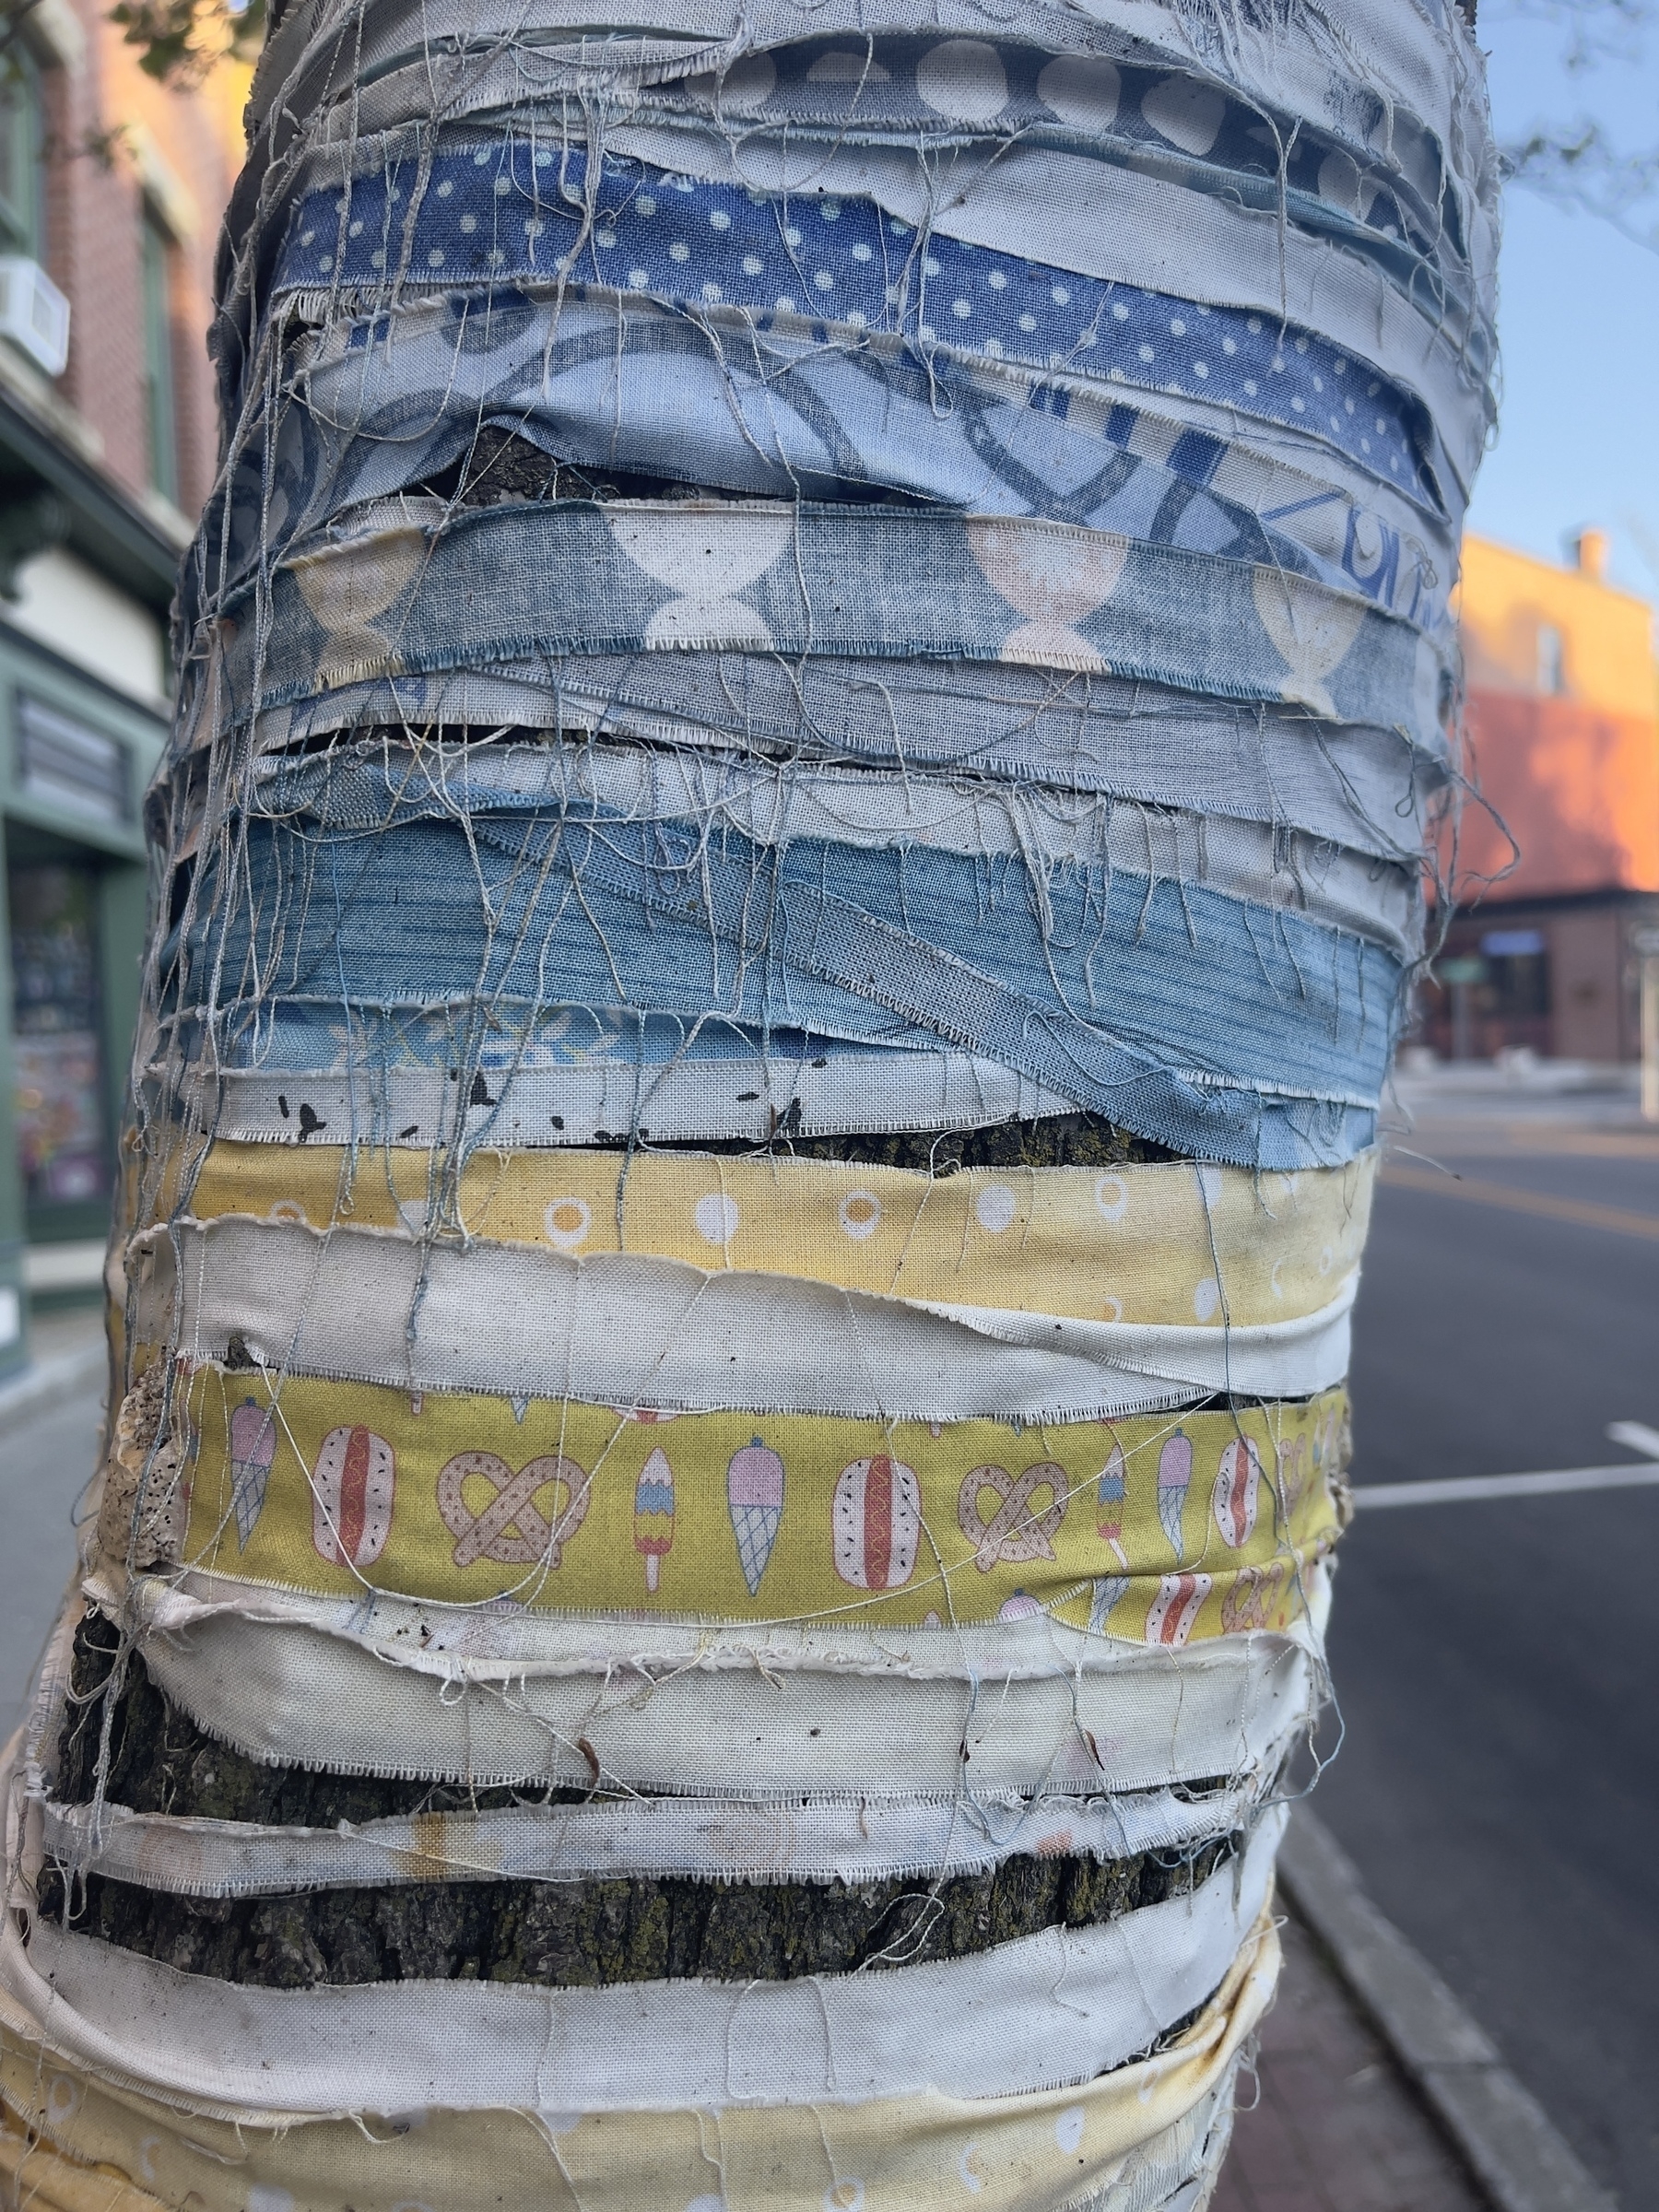 Fabric strips wrapped around a tree trunk.